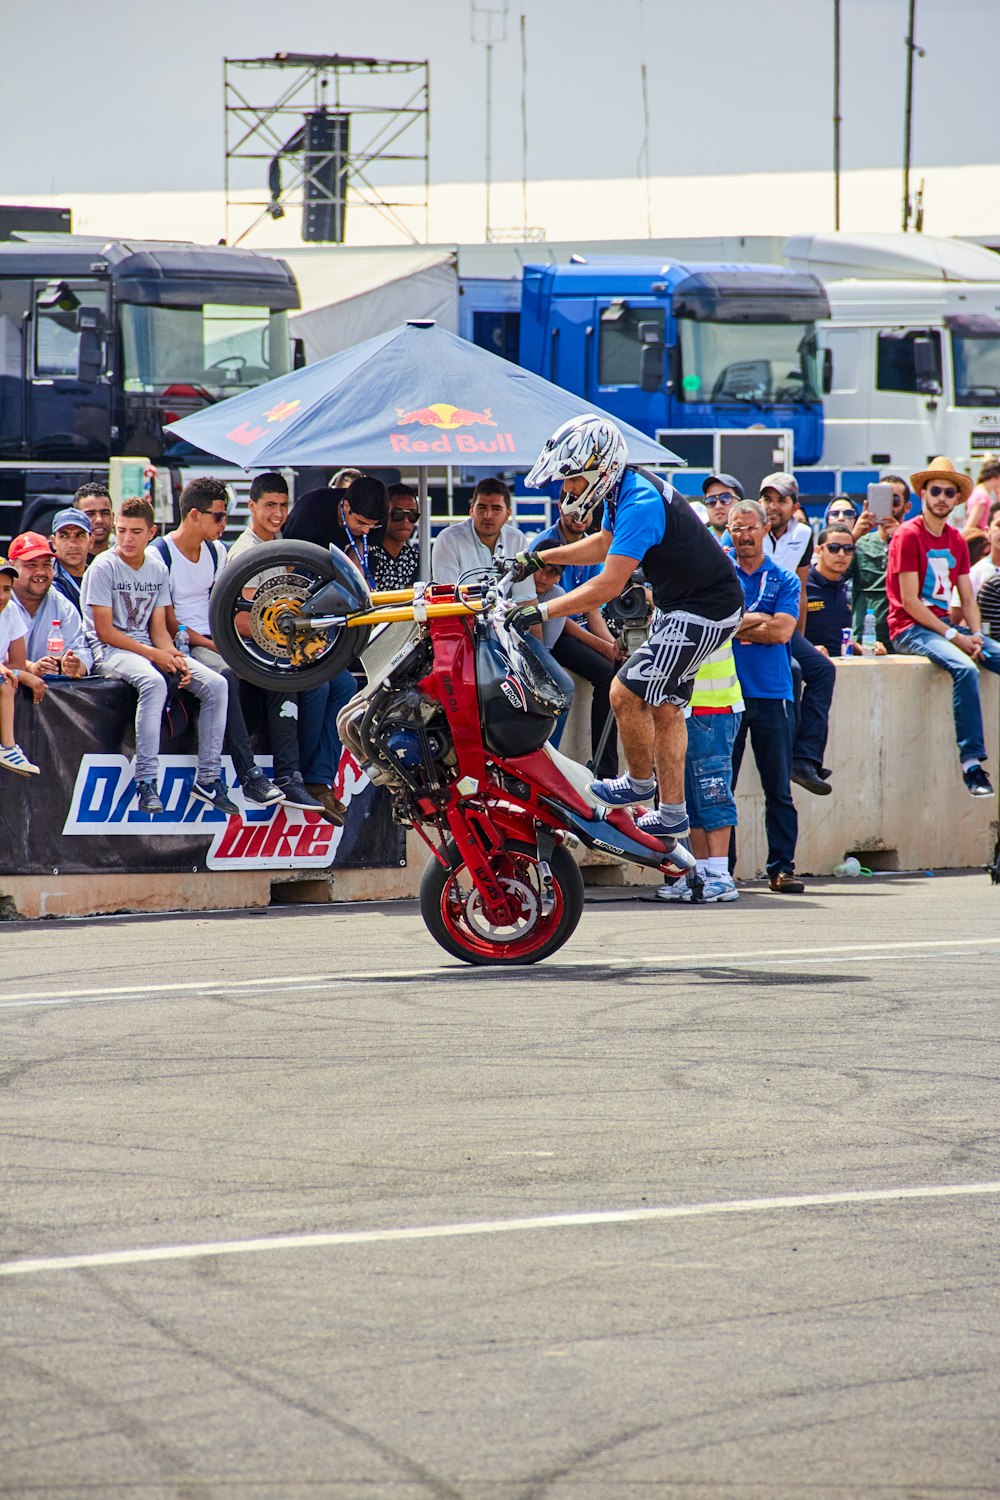 a person on a motorcycle doing a trick in front of a crowd